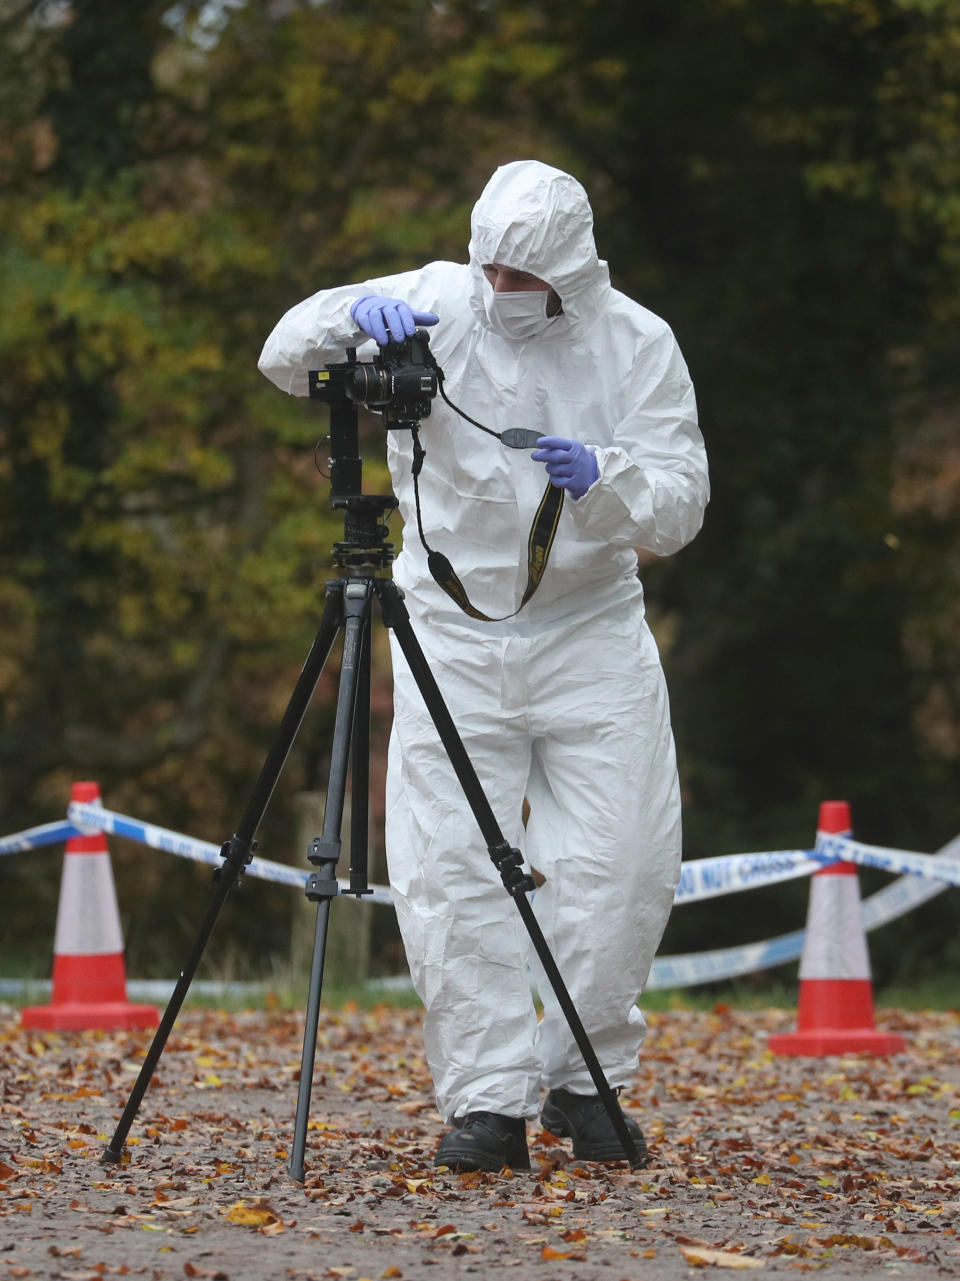 Forensic investigators at Watlington Hill in Oxfordshire after the body of a woman was discovered at the National Trust estate, a man has been arrested on suspicion of murder and is being treated for serious injuries, police said.